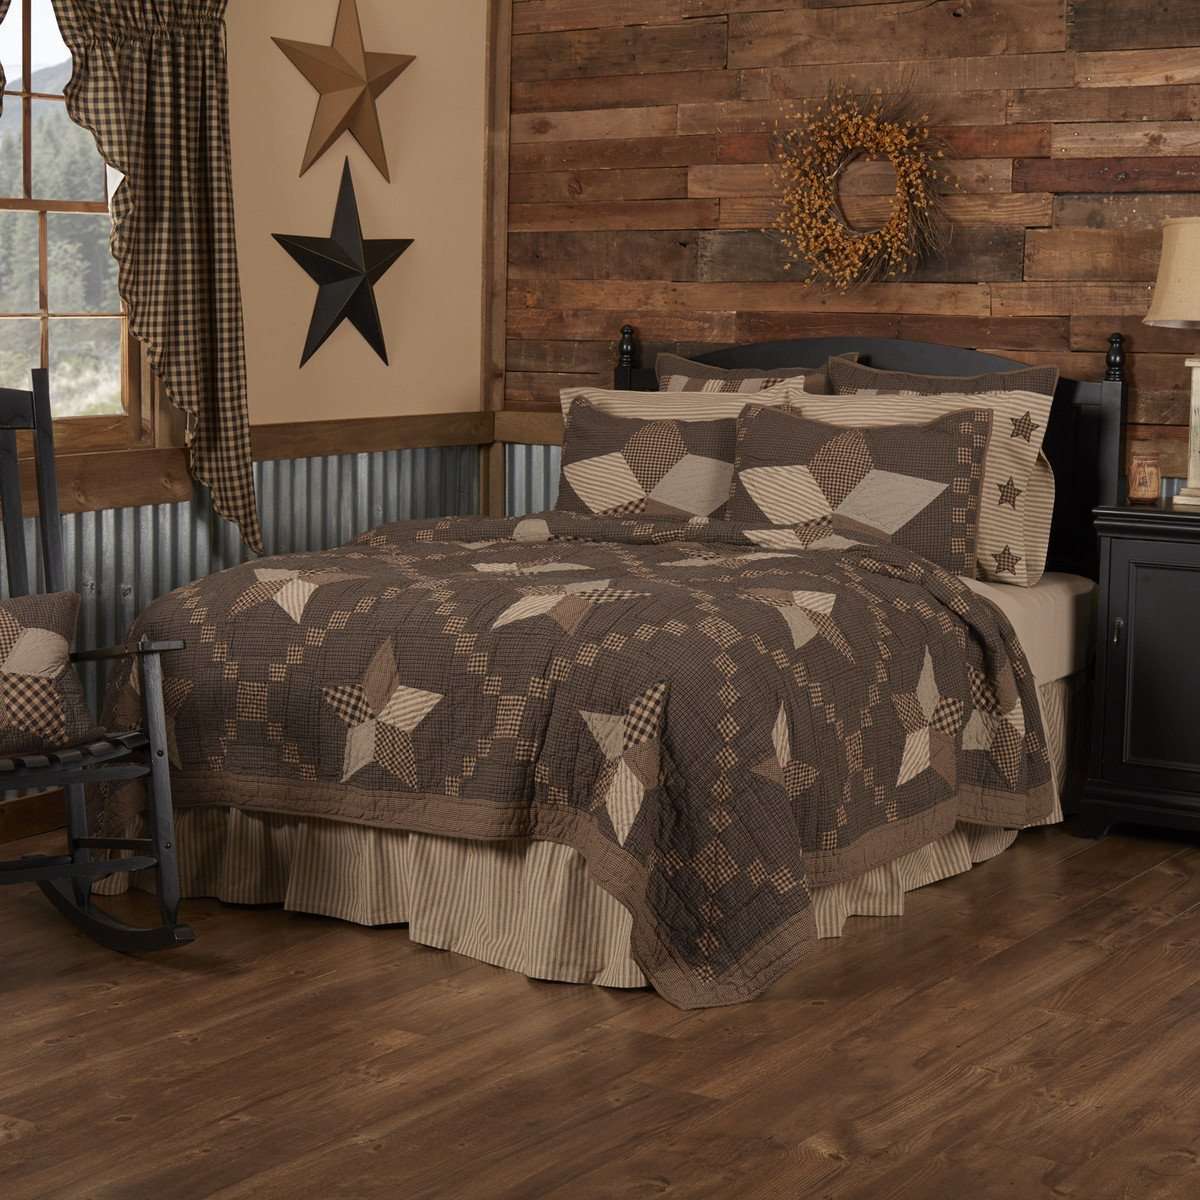 Farmhouse Star Luxury King Quilt 120Wx105L VHC Brands